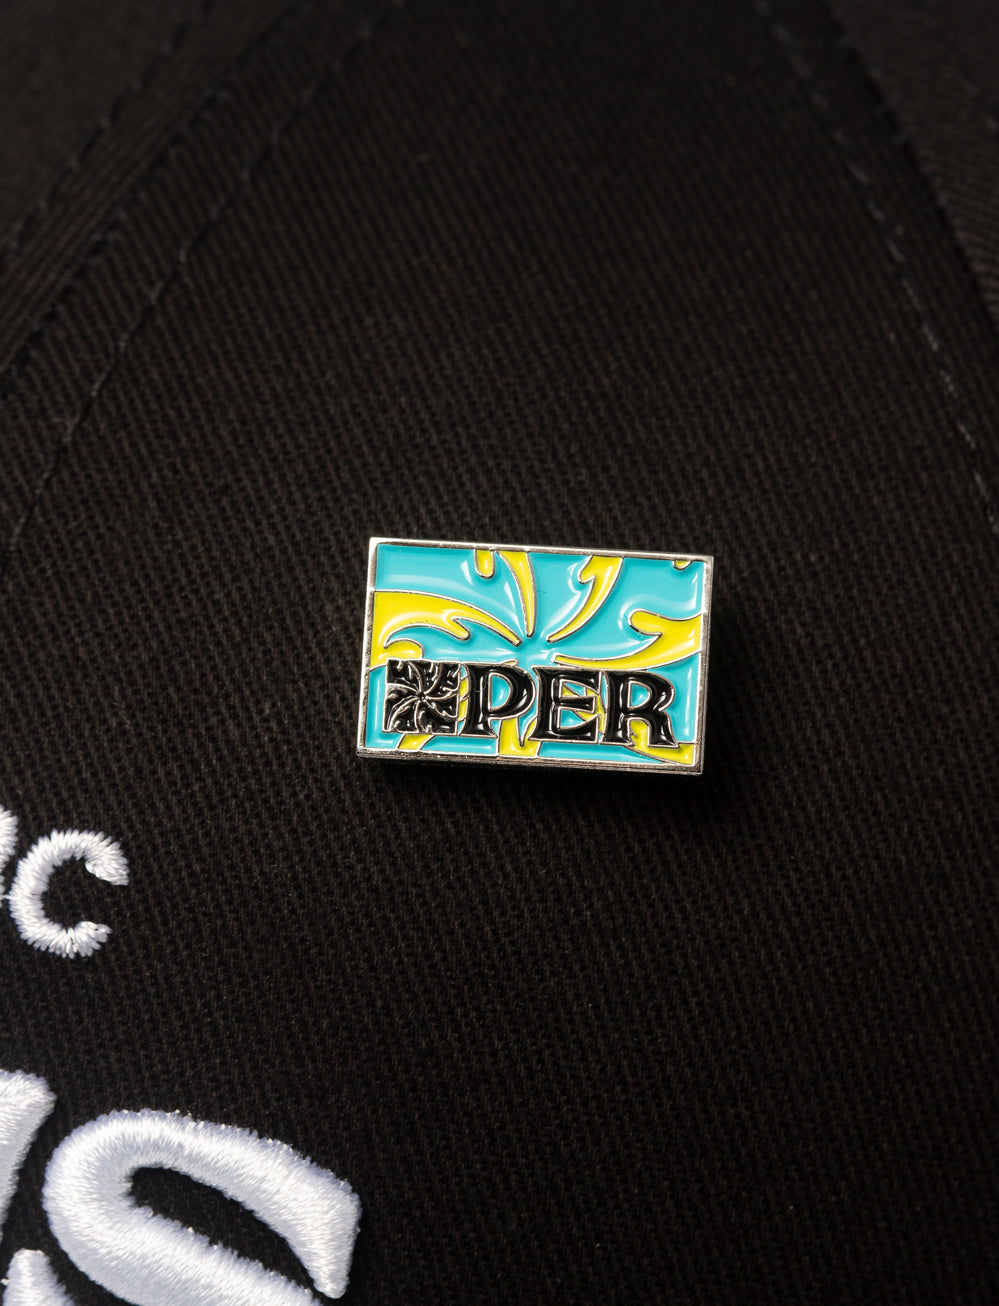 SVNS Perth Event Pin Badge - Yellow